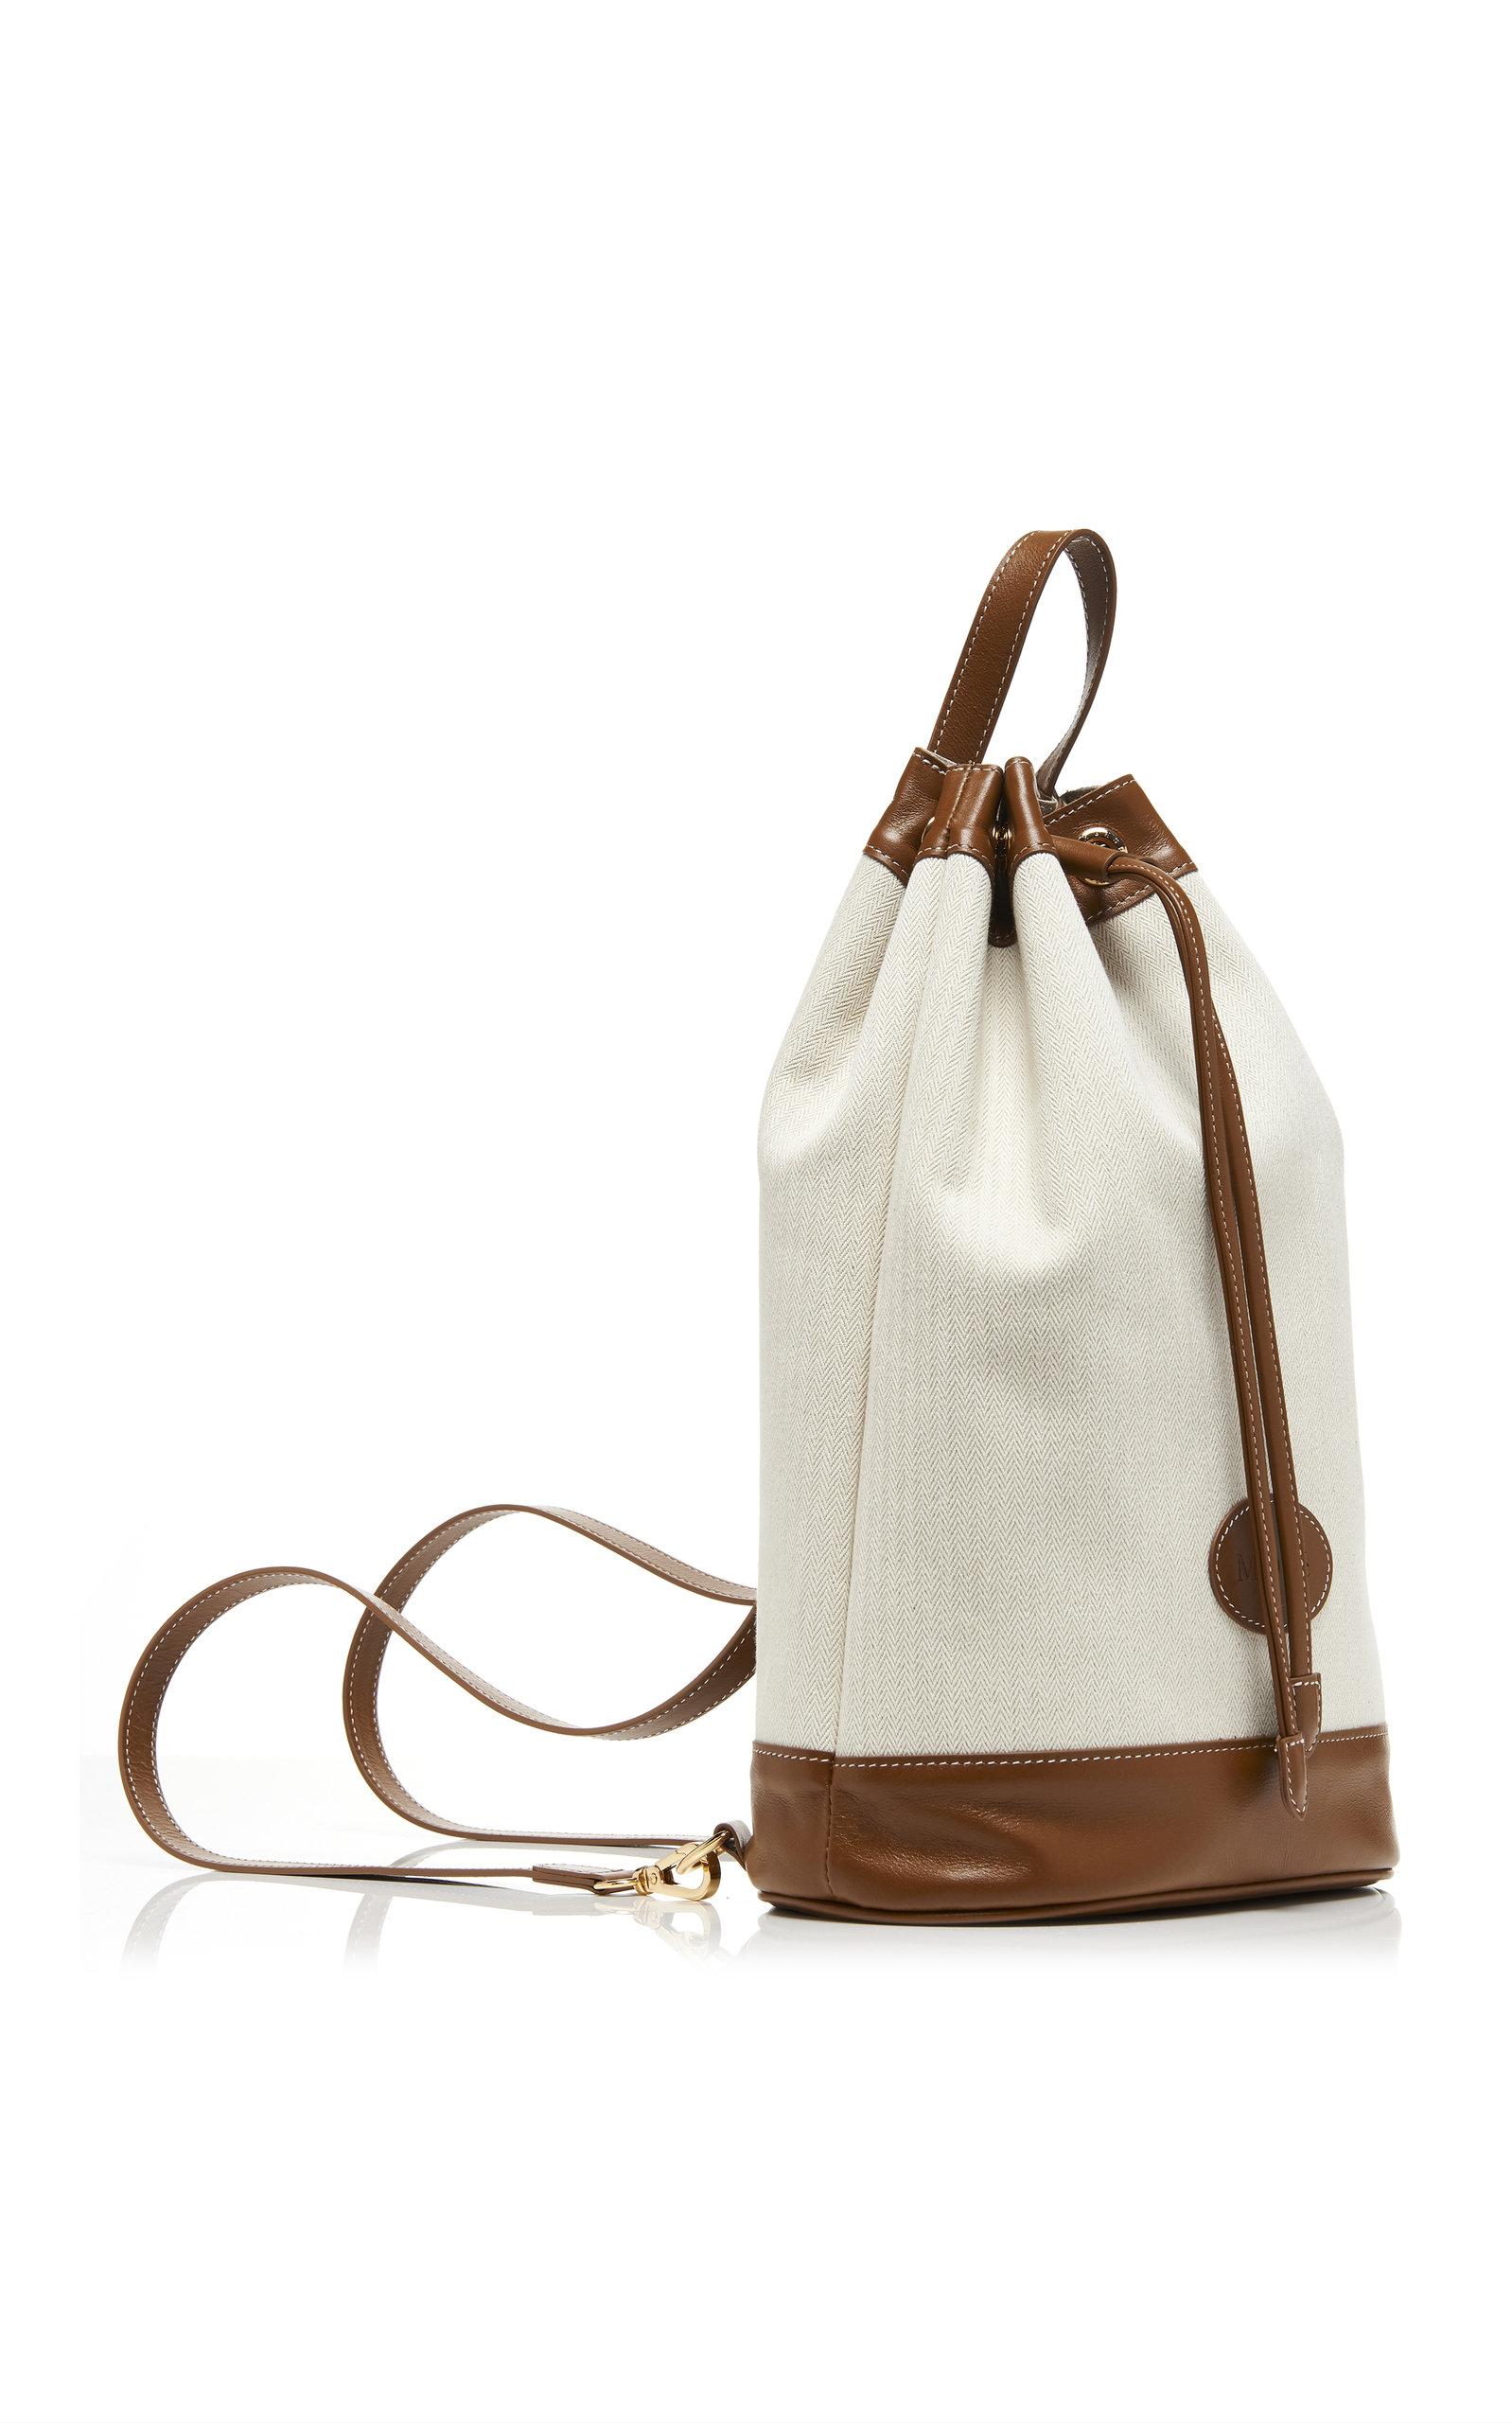 Marge Sherwood Bessette Leather-Trimmed Canvas Tote on SALE